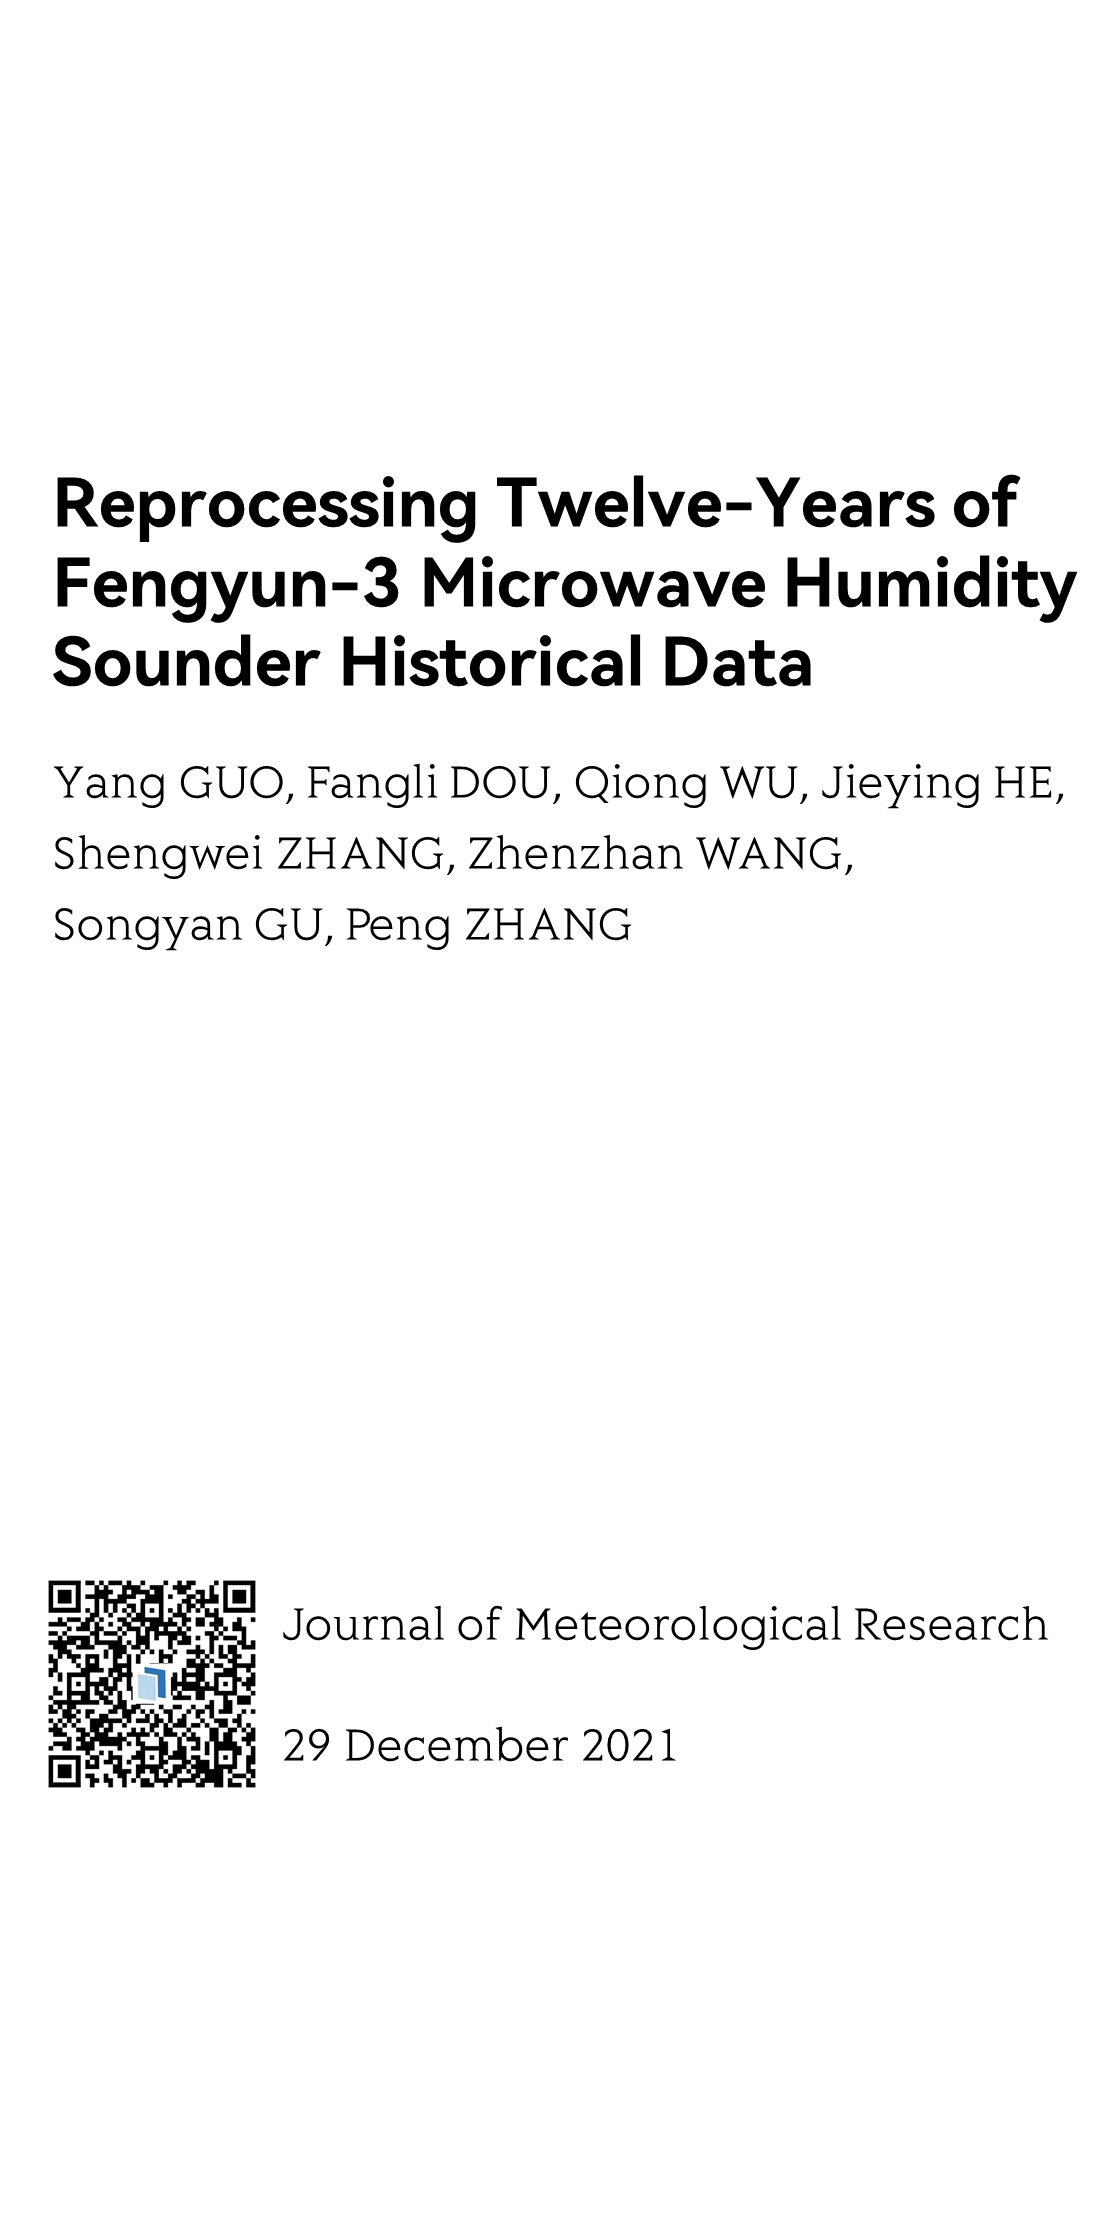 Reprocessing Twelve-Years of Fengyun-3 Microwave Humidity Sounder Historical Data_1